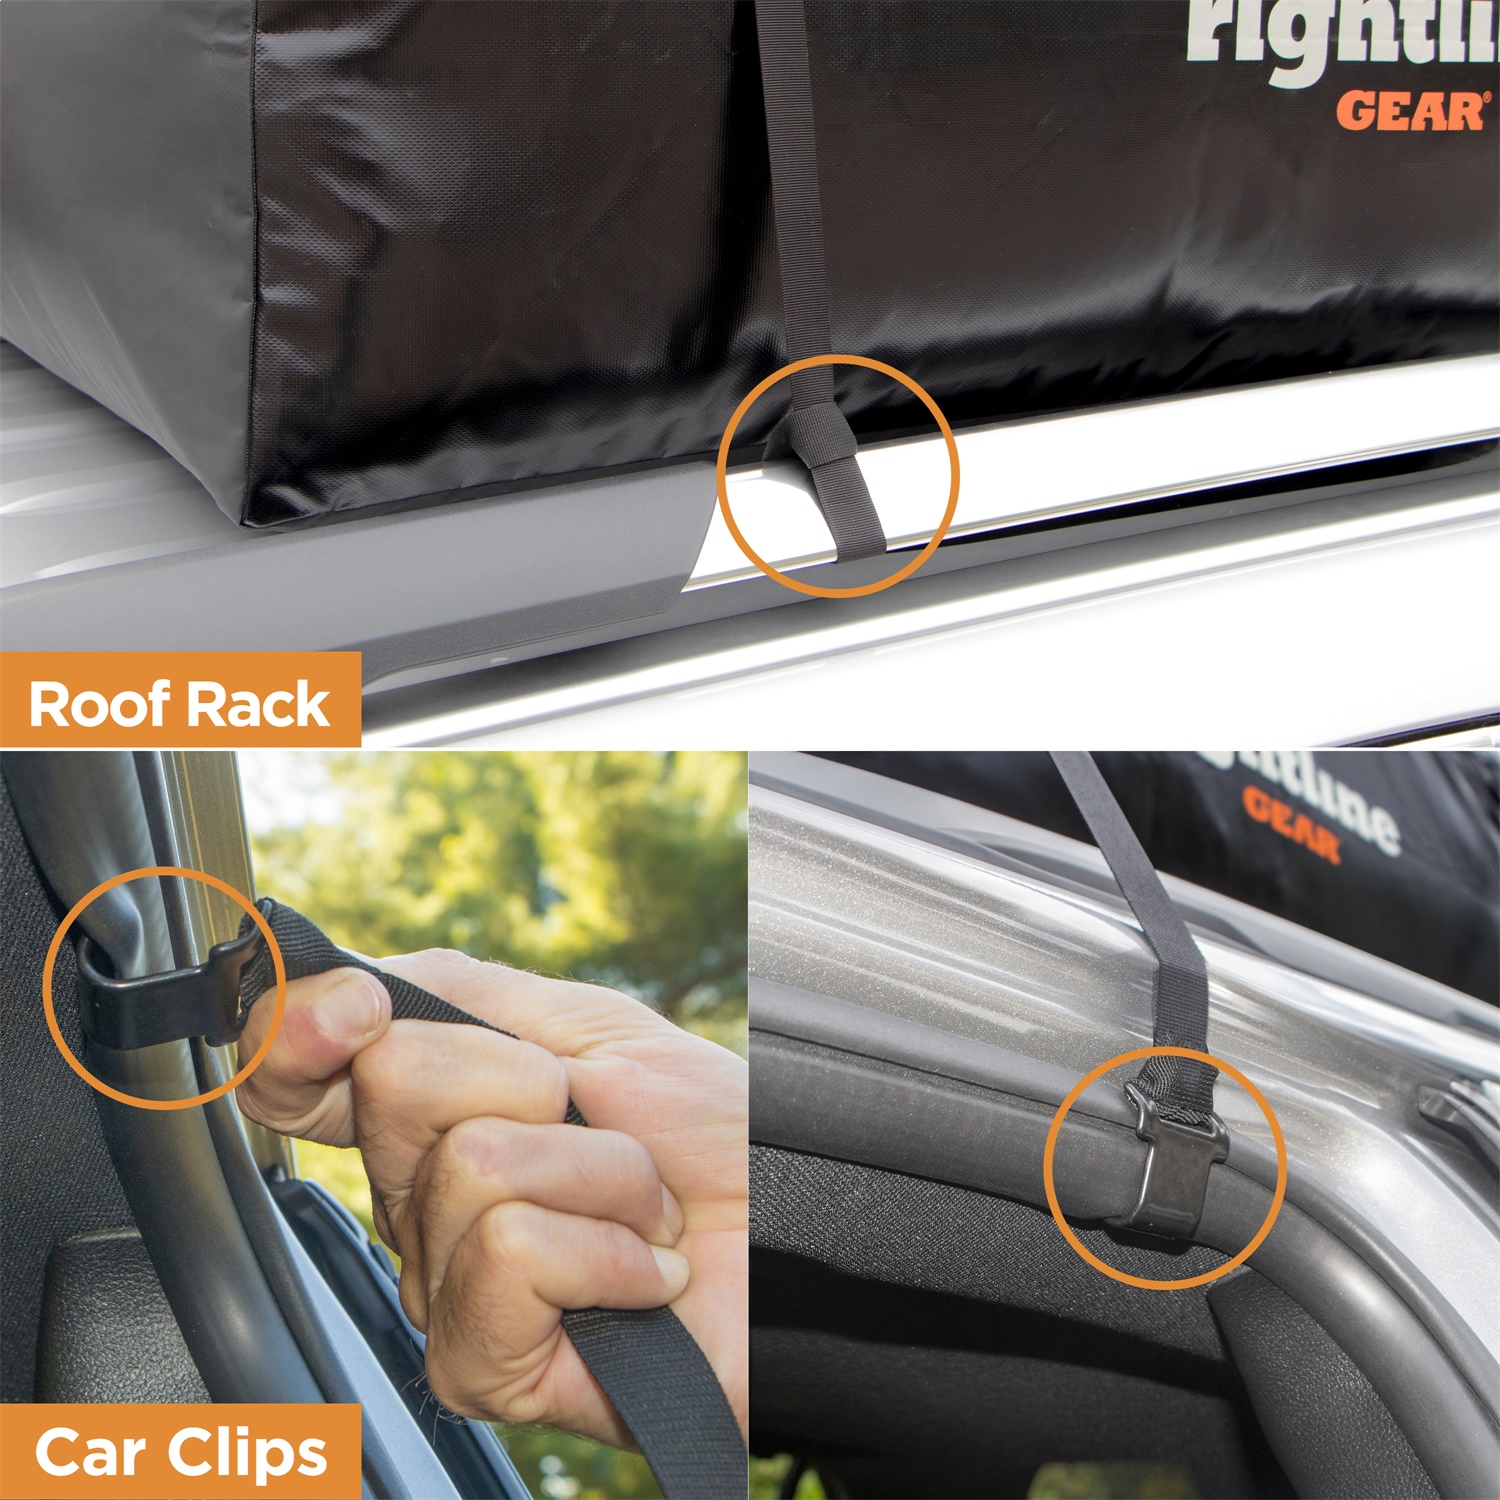 Rightline Gear Sport 2 Car Top Carrier, 100S20 Fits select: 1997-2019 HONDA CR-V, 2001-2019 FORD ESCAPE - image 3 of 6